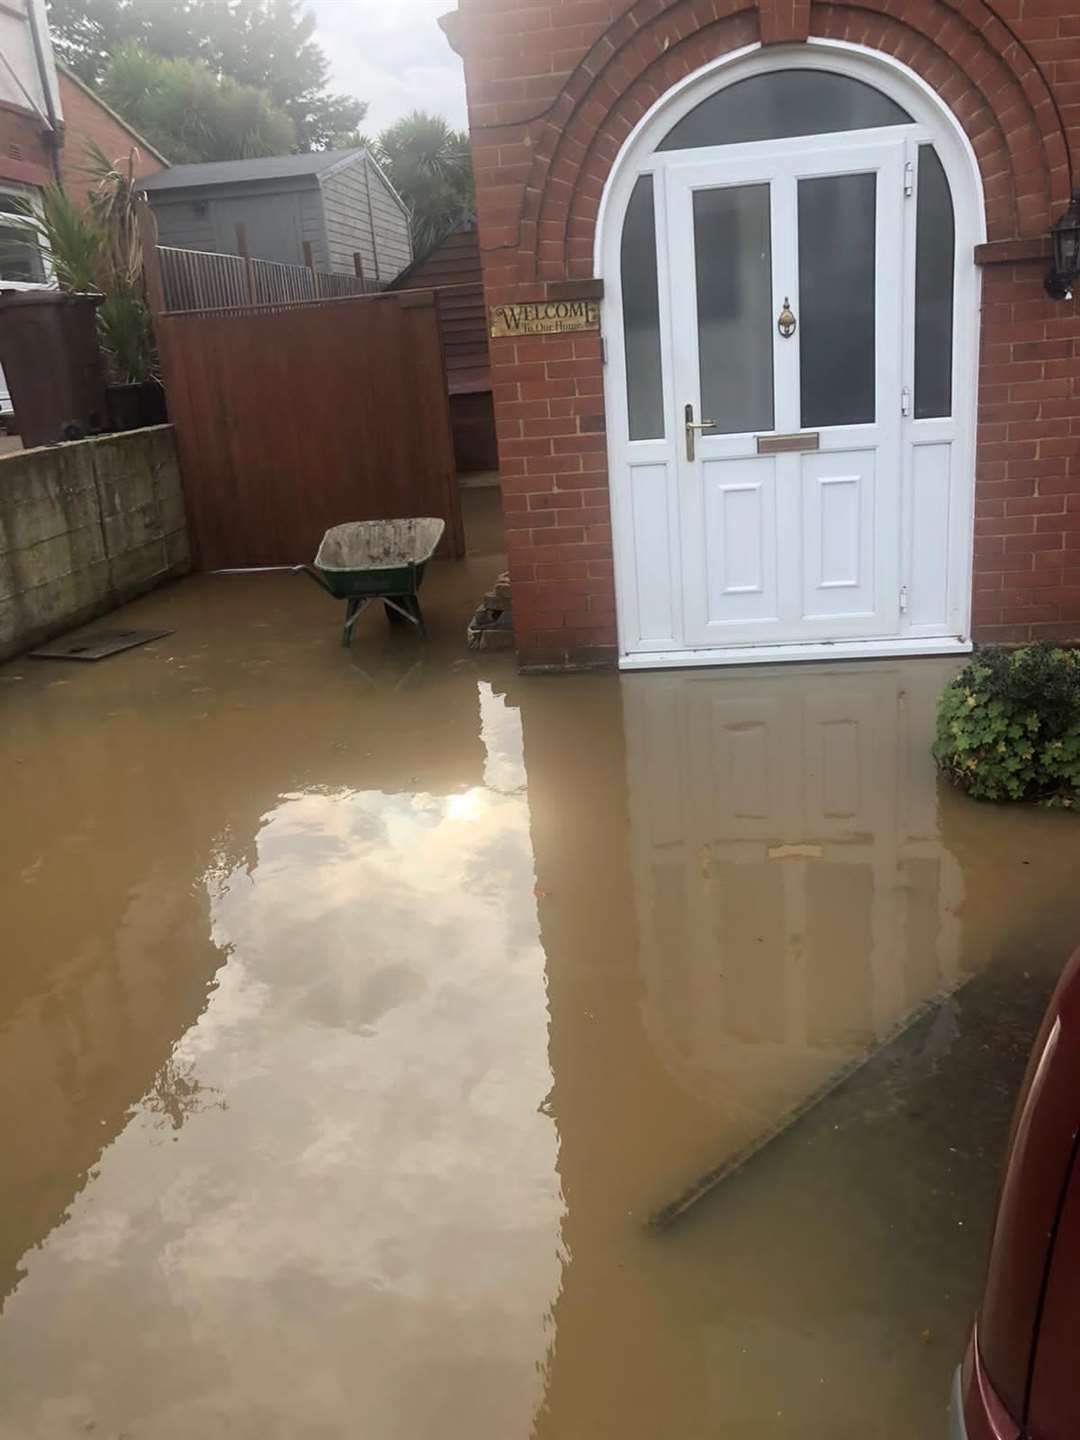 Front gardens in Sittingboure were flooded after a blocked drain on Saturday, November, 14